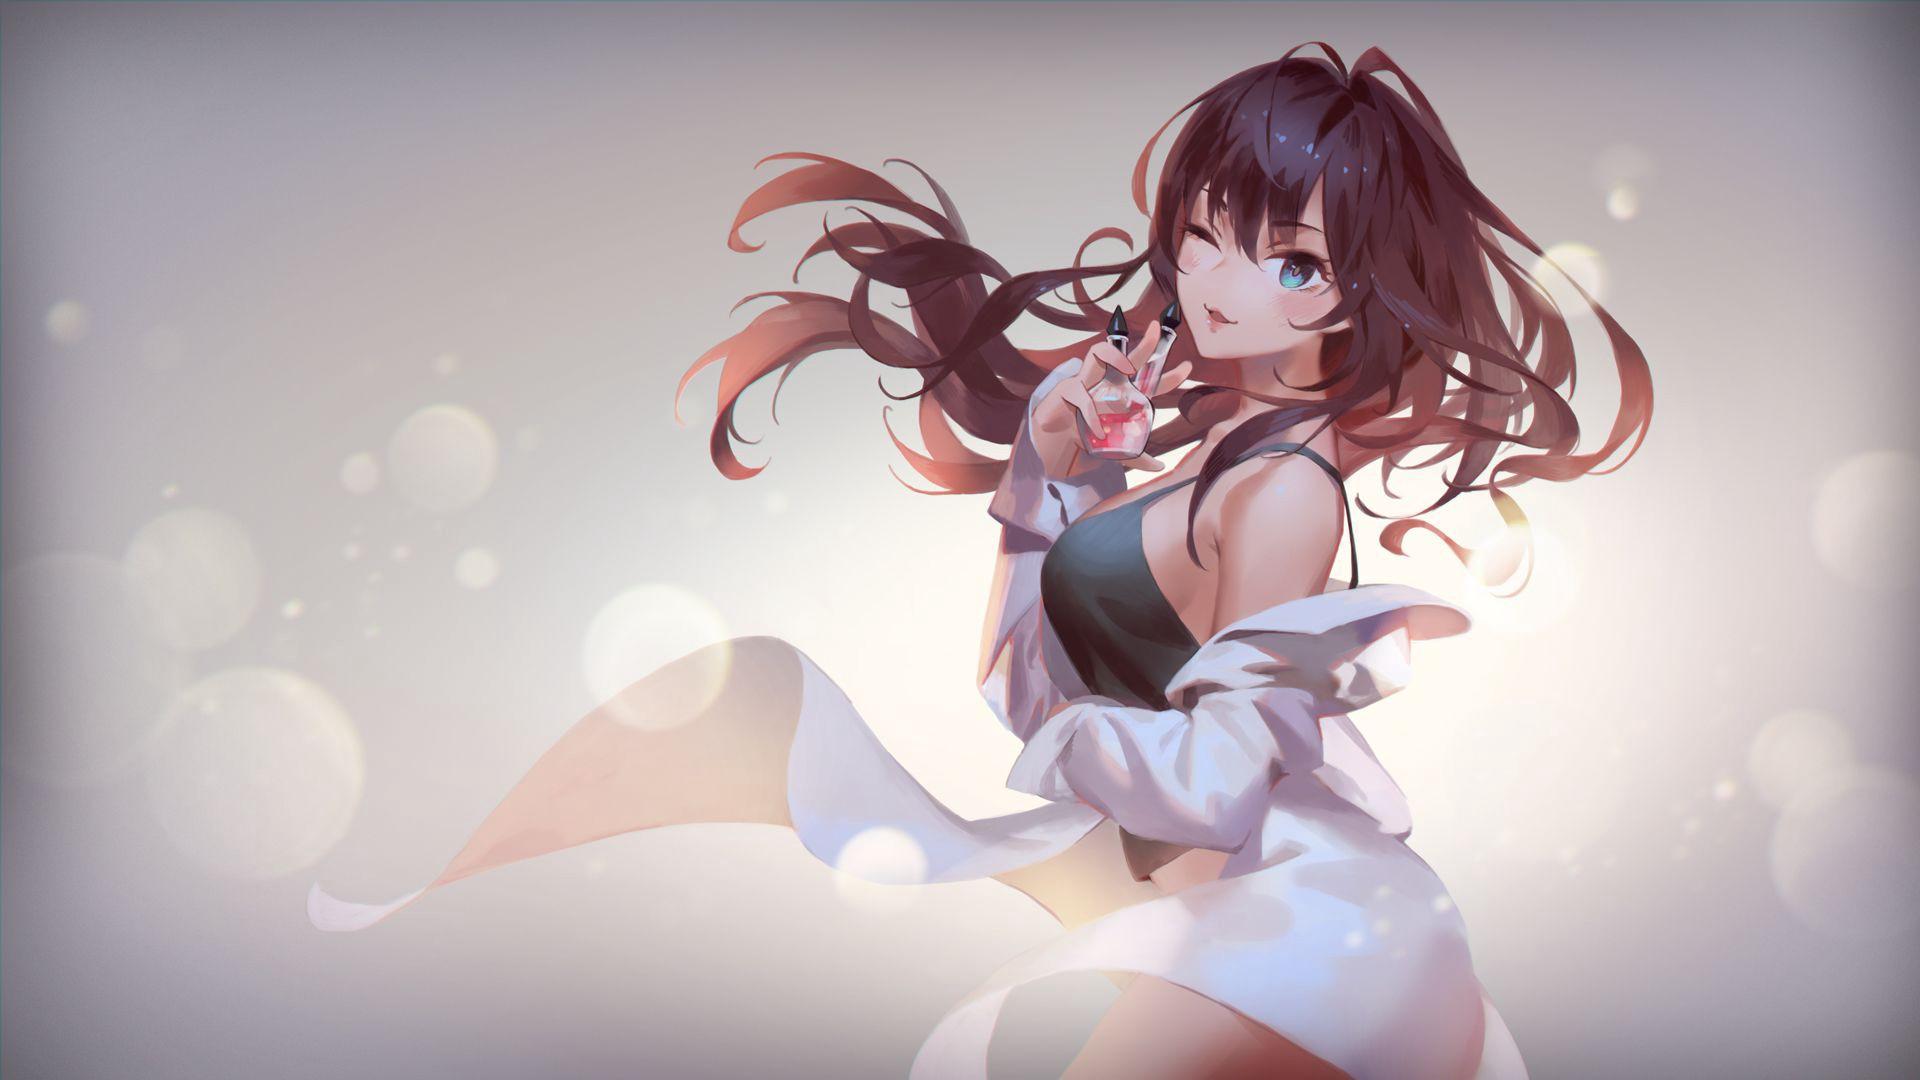 anime girl live wallpaper for android